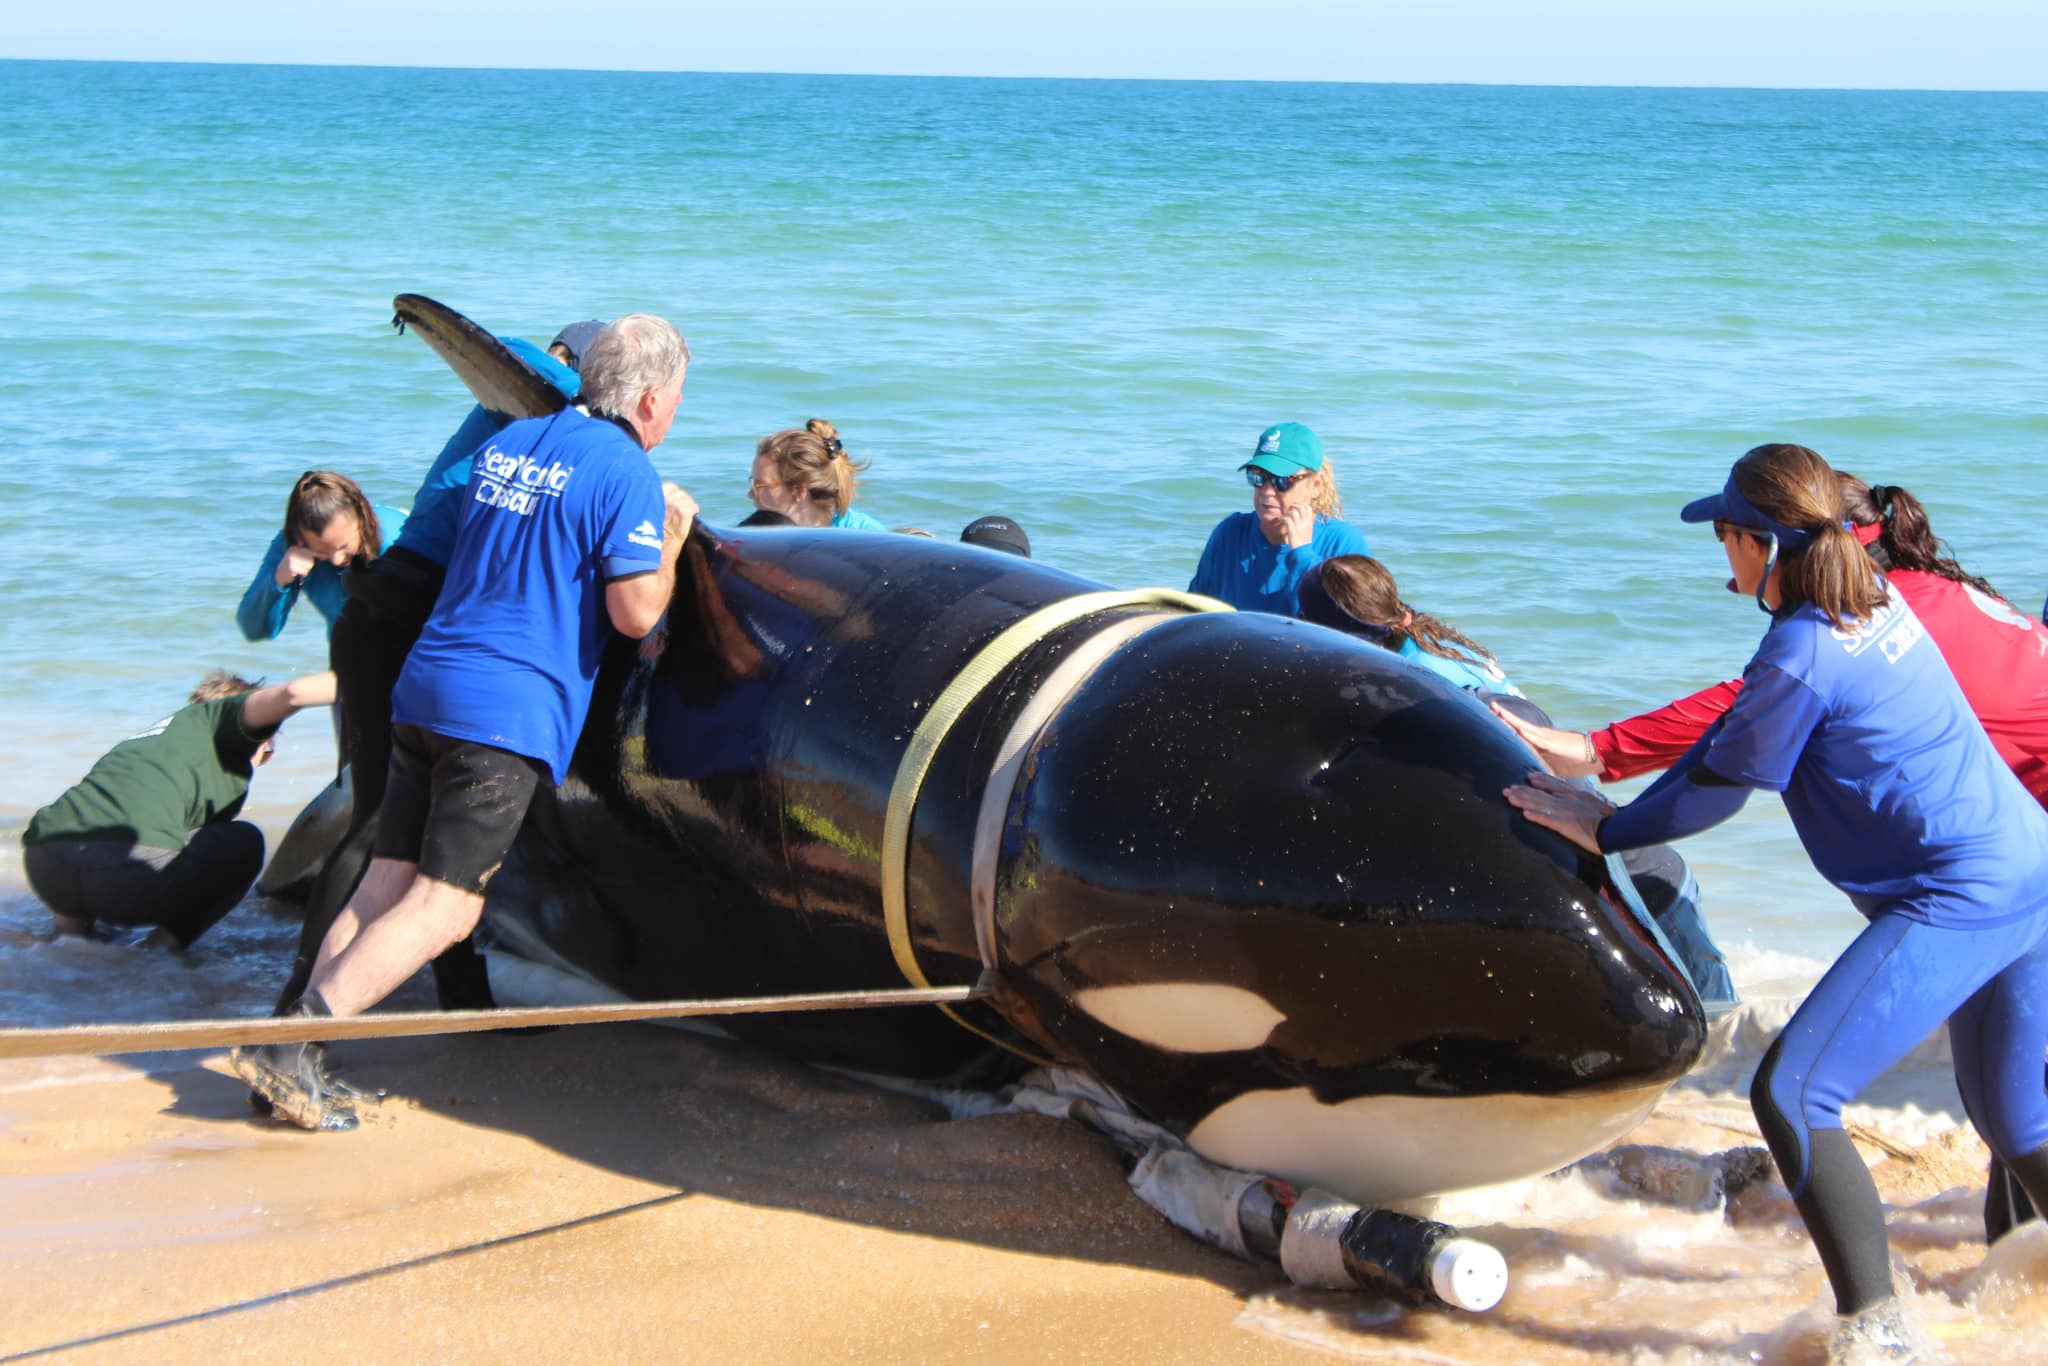 PHOTO: A giant 21-foot killer whale weighing an estimated 3-and-a-half tons has died after beaching itself in the early morning of Jan. 11, 2023 at the south end of Jungle Hut beach in Flagler County, Florida.